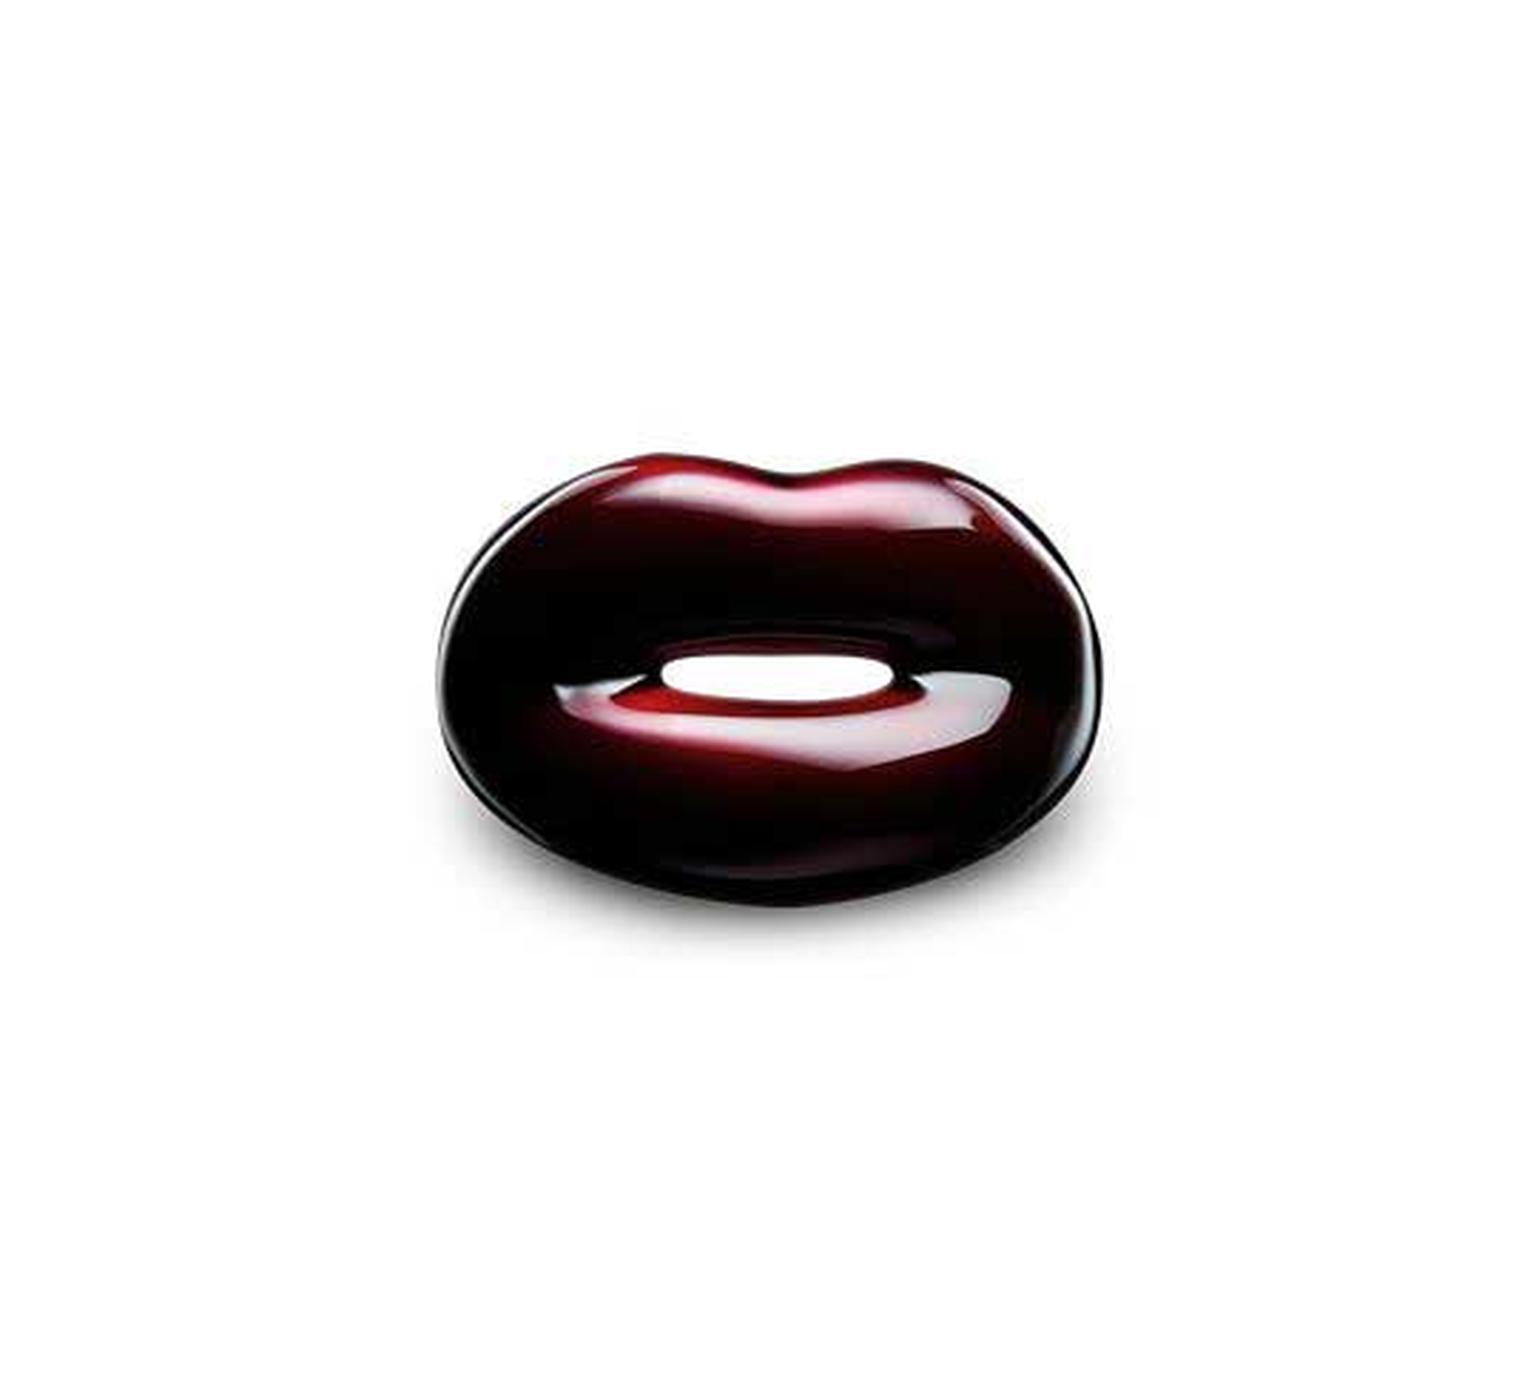 The Solange Azagury-Partridge Hotlips ring in yellow gold and black cherry lacquer is a cult classic (£1,500).